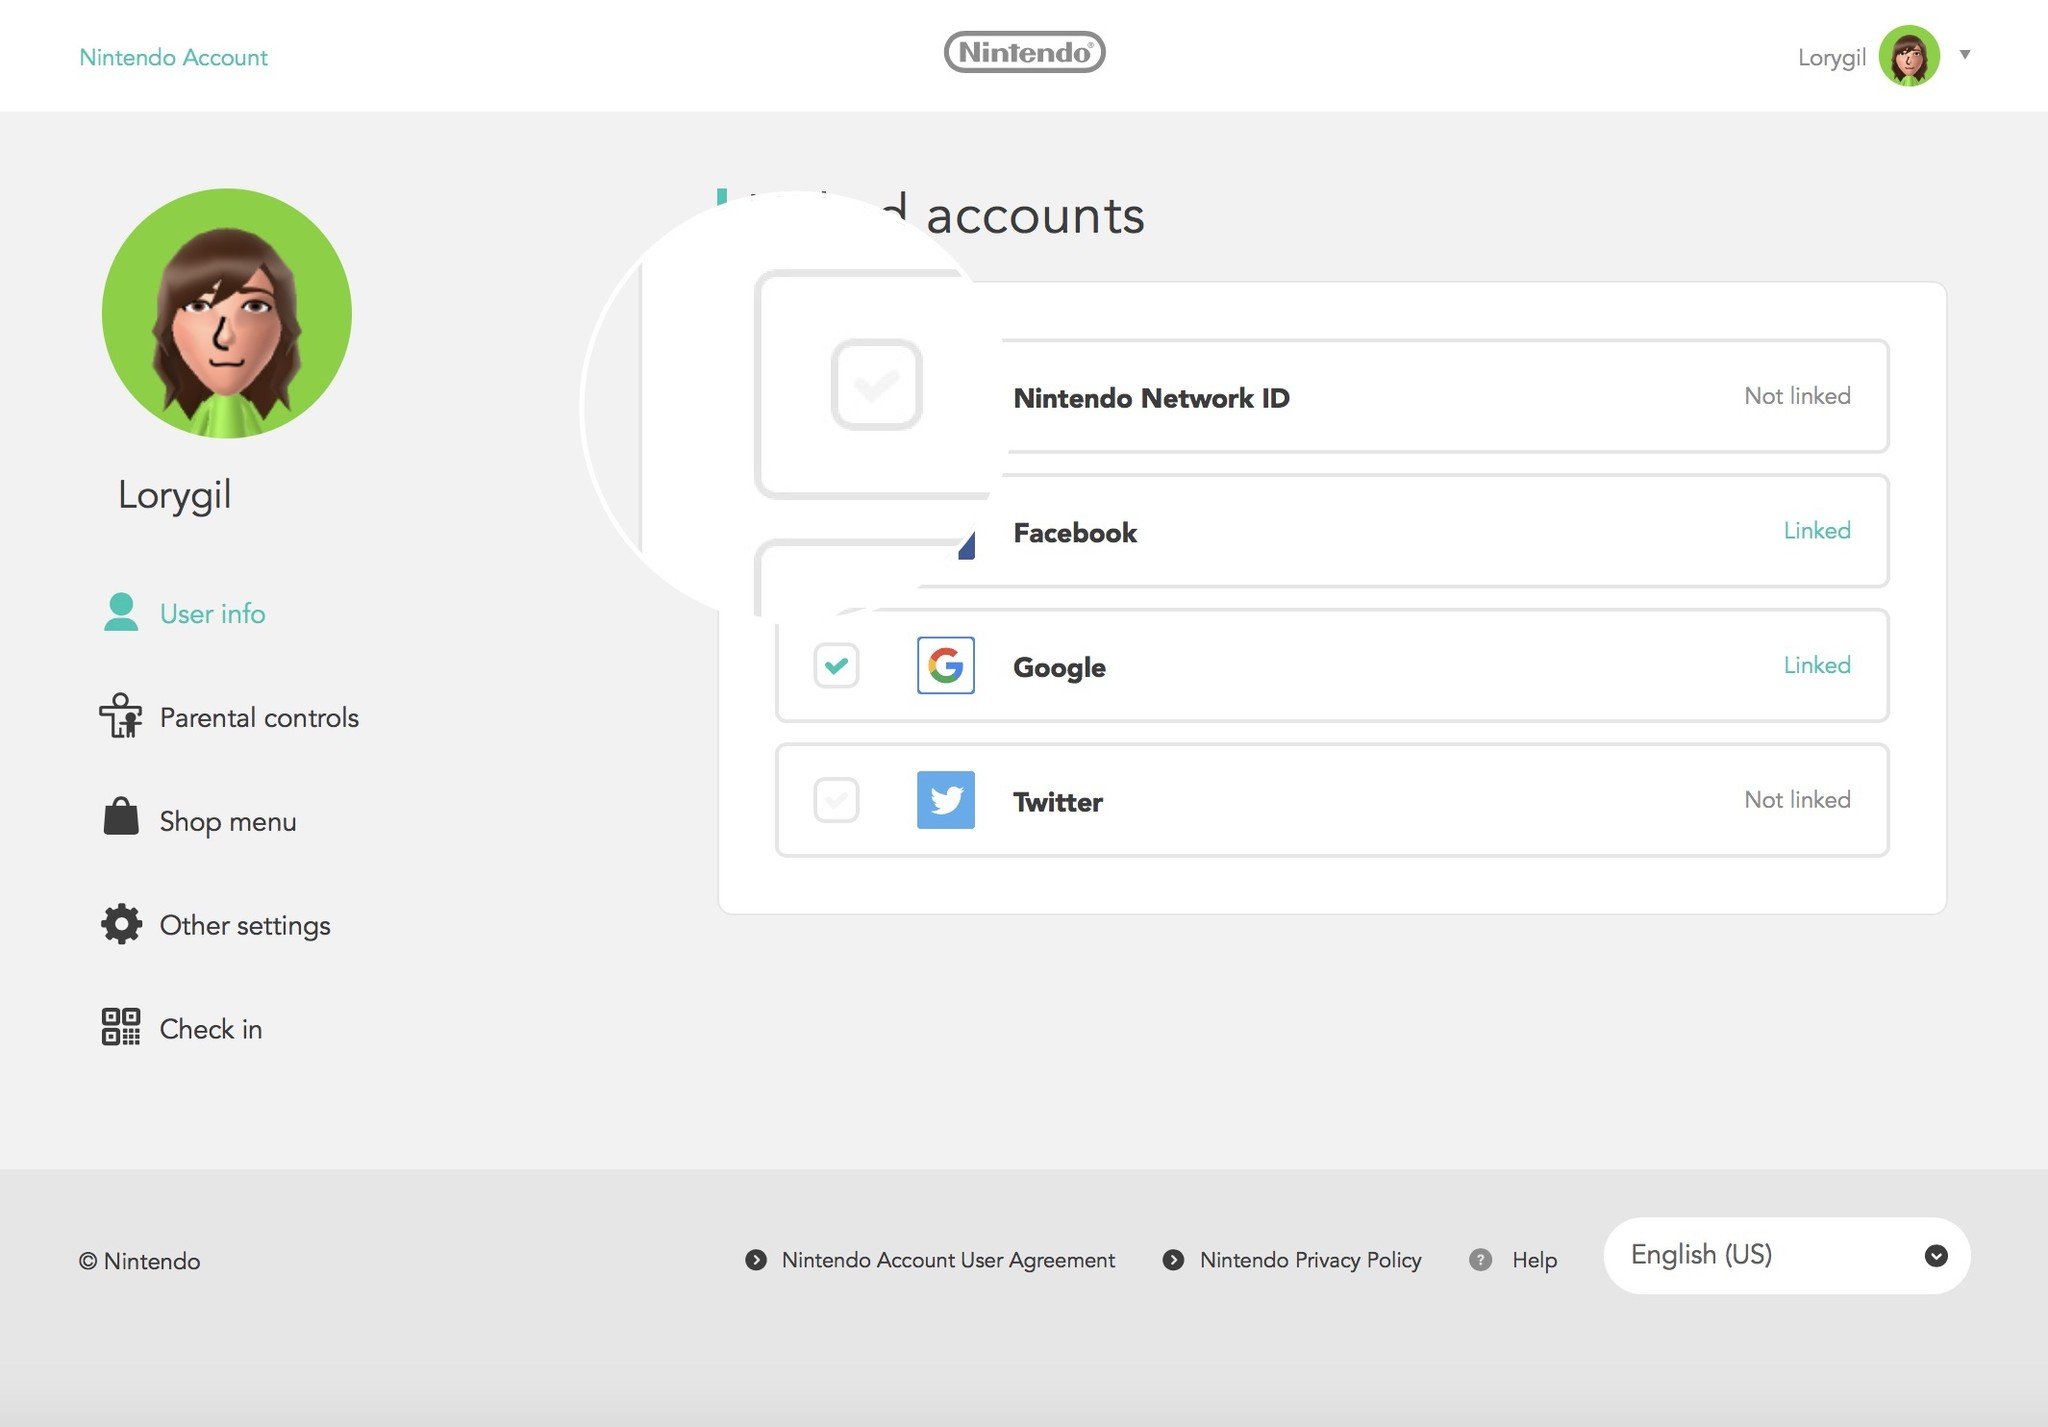 Link Nintendo Network ID to Nintendo Account by ticking the box under NNID